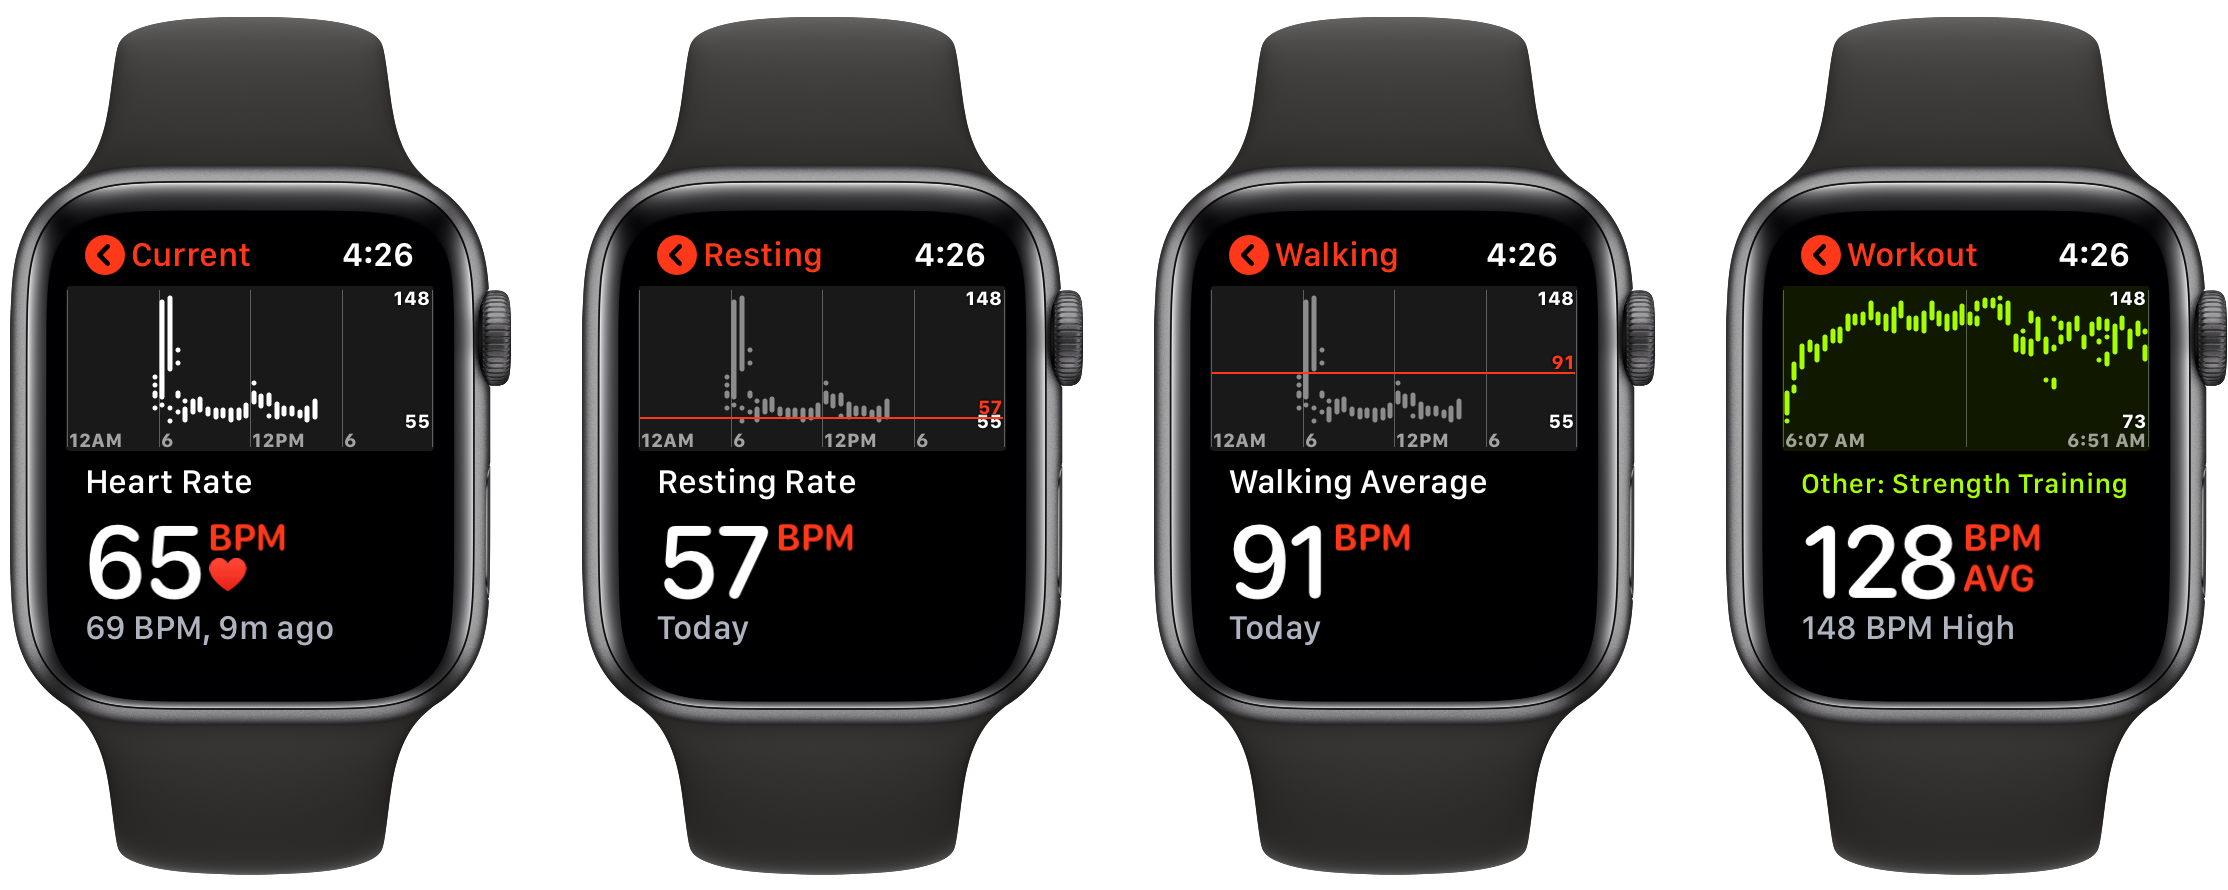 How to see Apple Watch heart rate history - Apple Watch